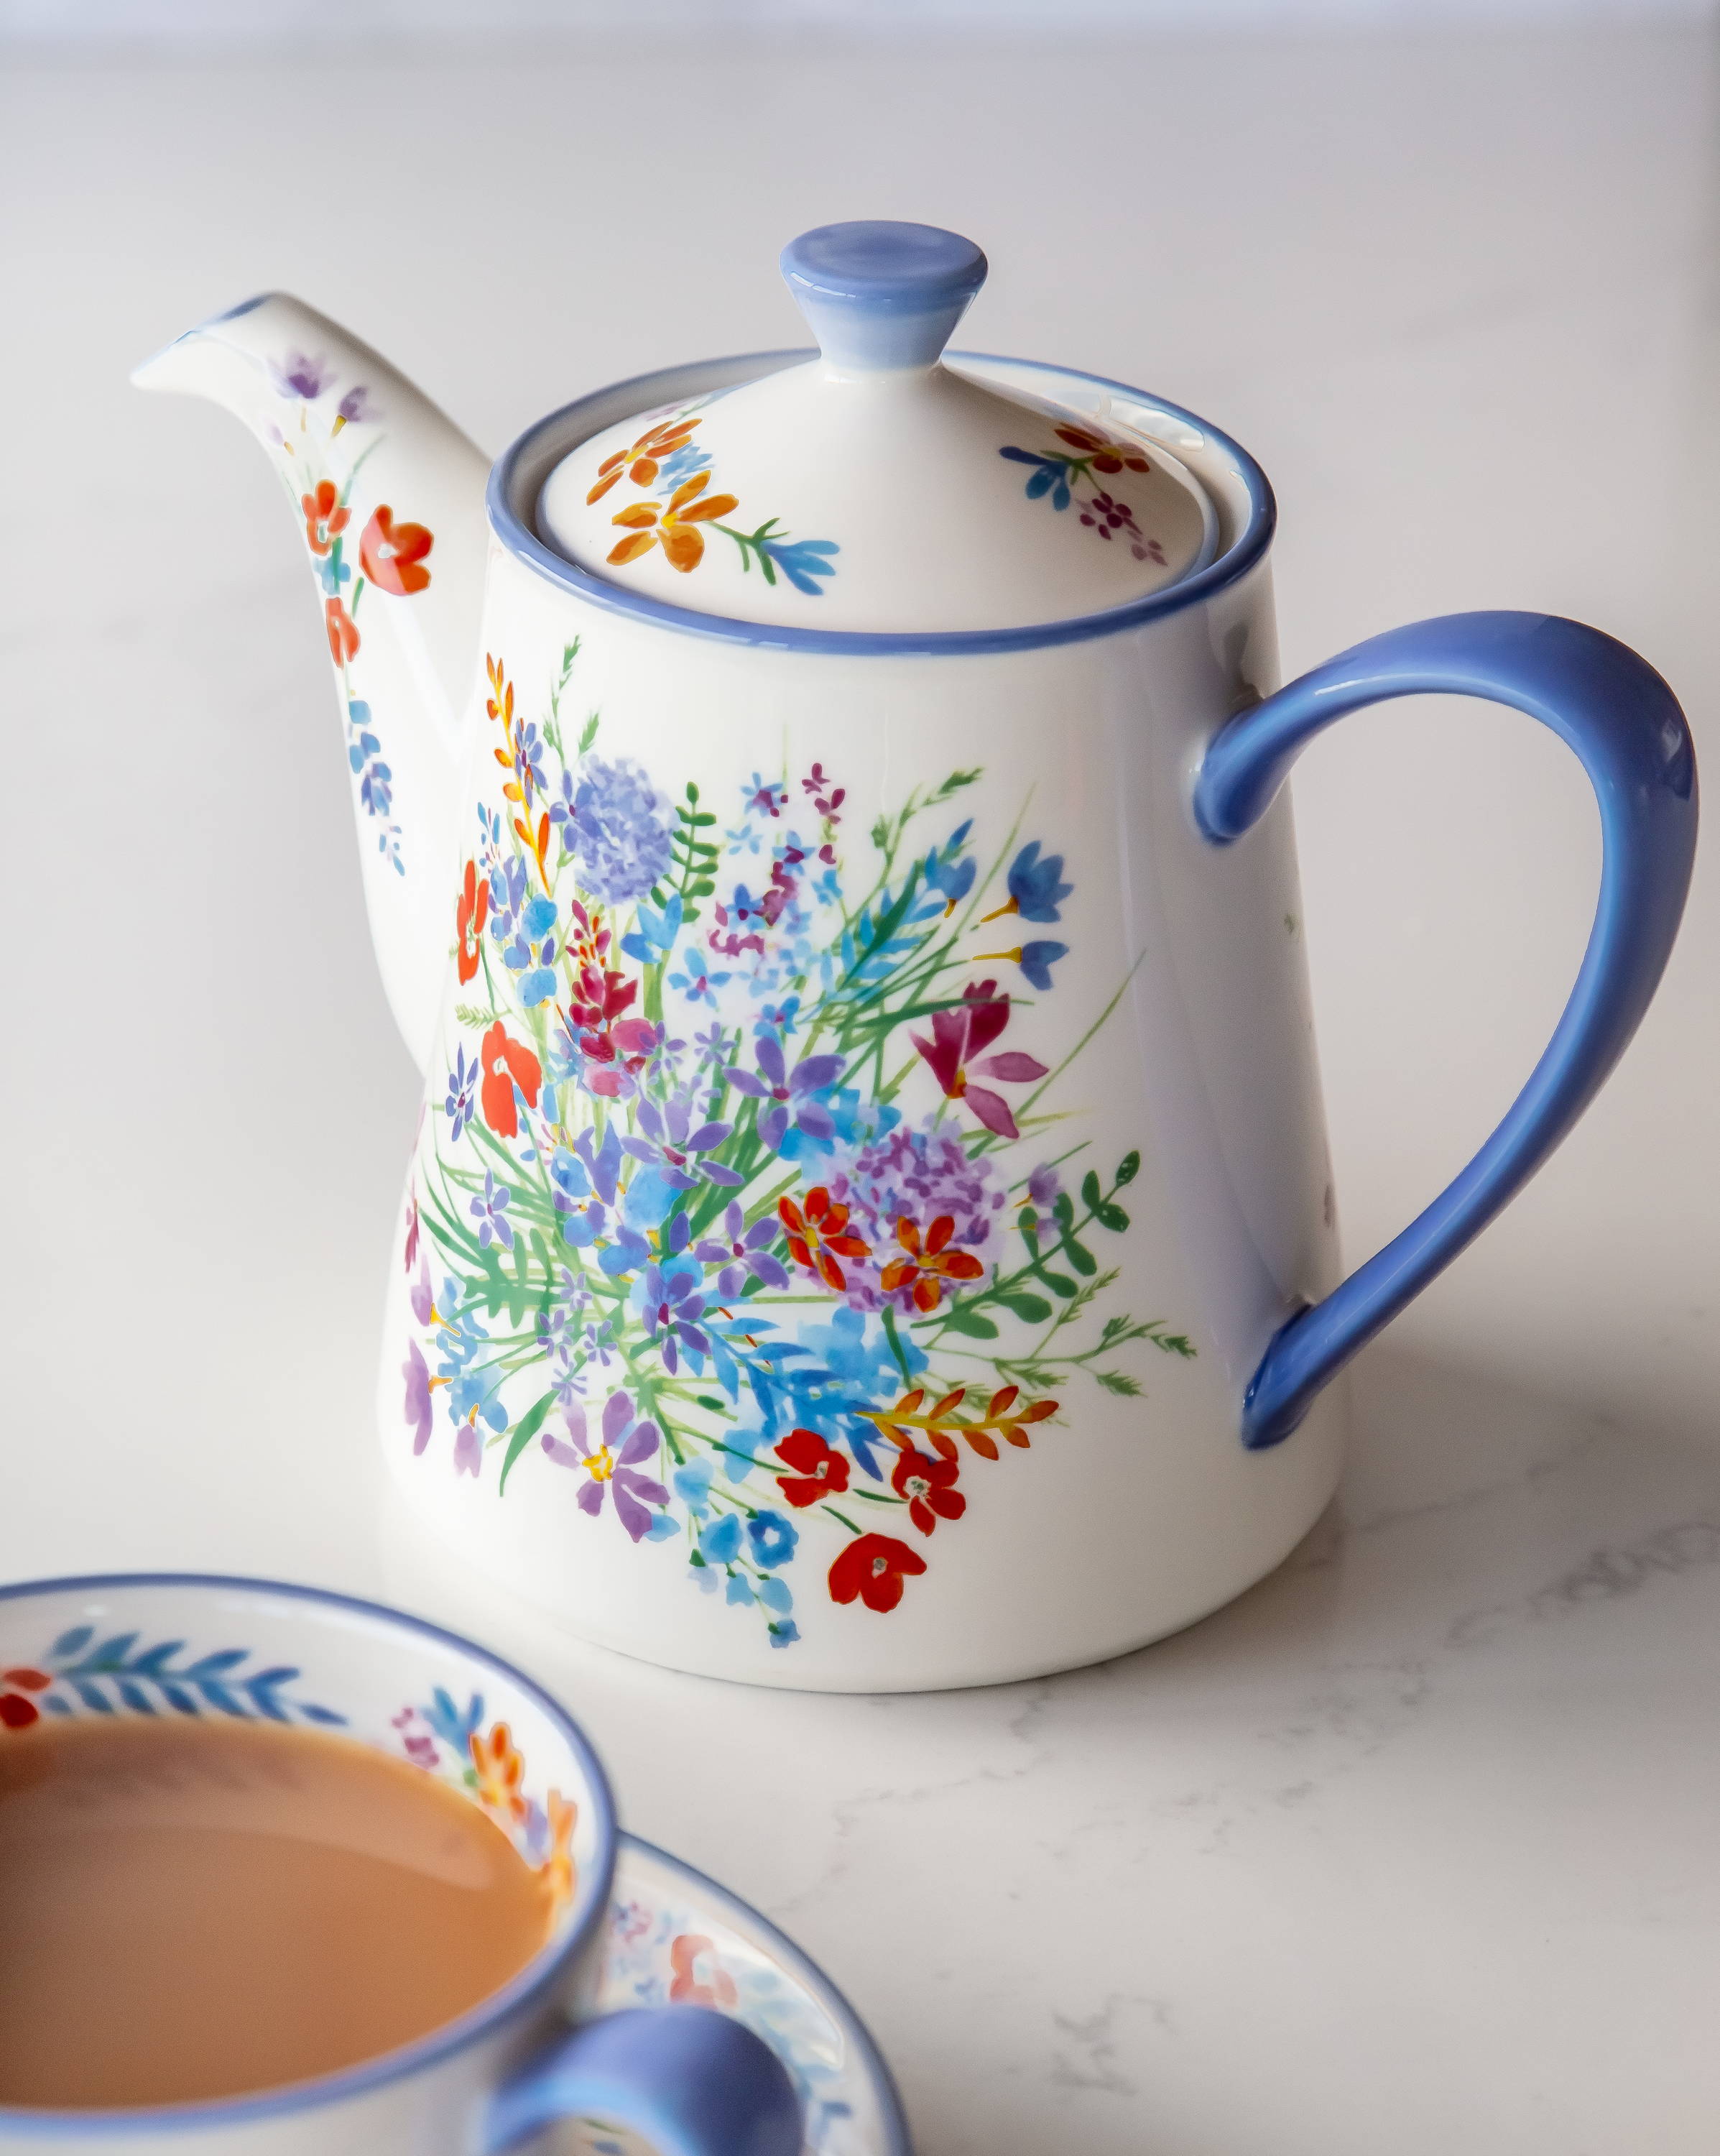 A teapot with a floral design and a cup of tea next to it.